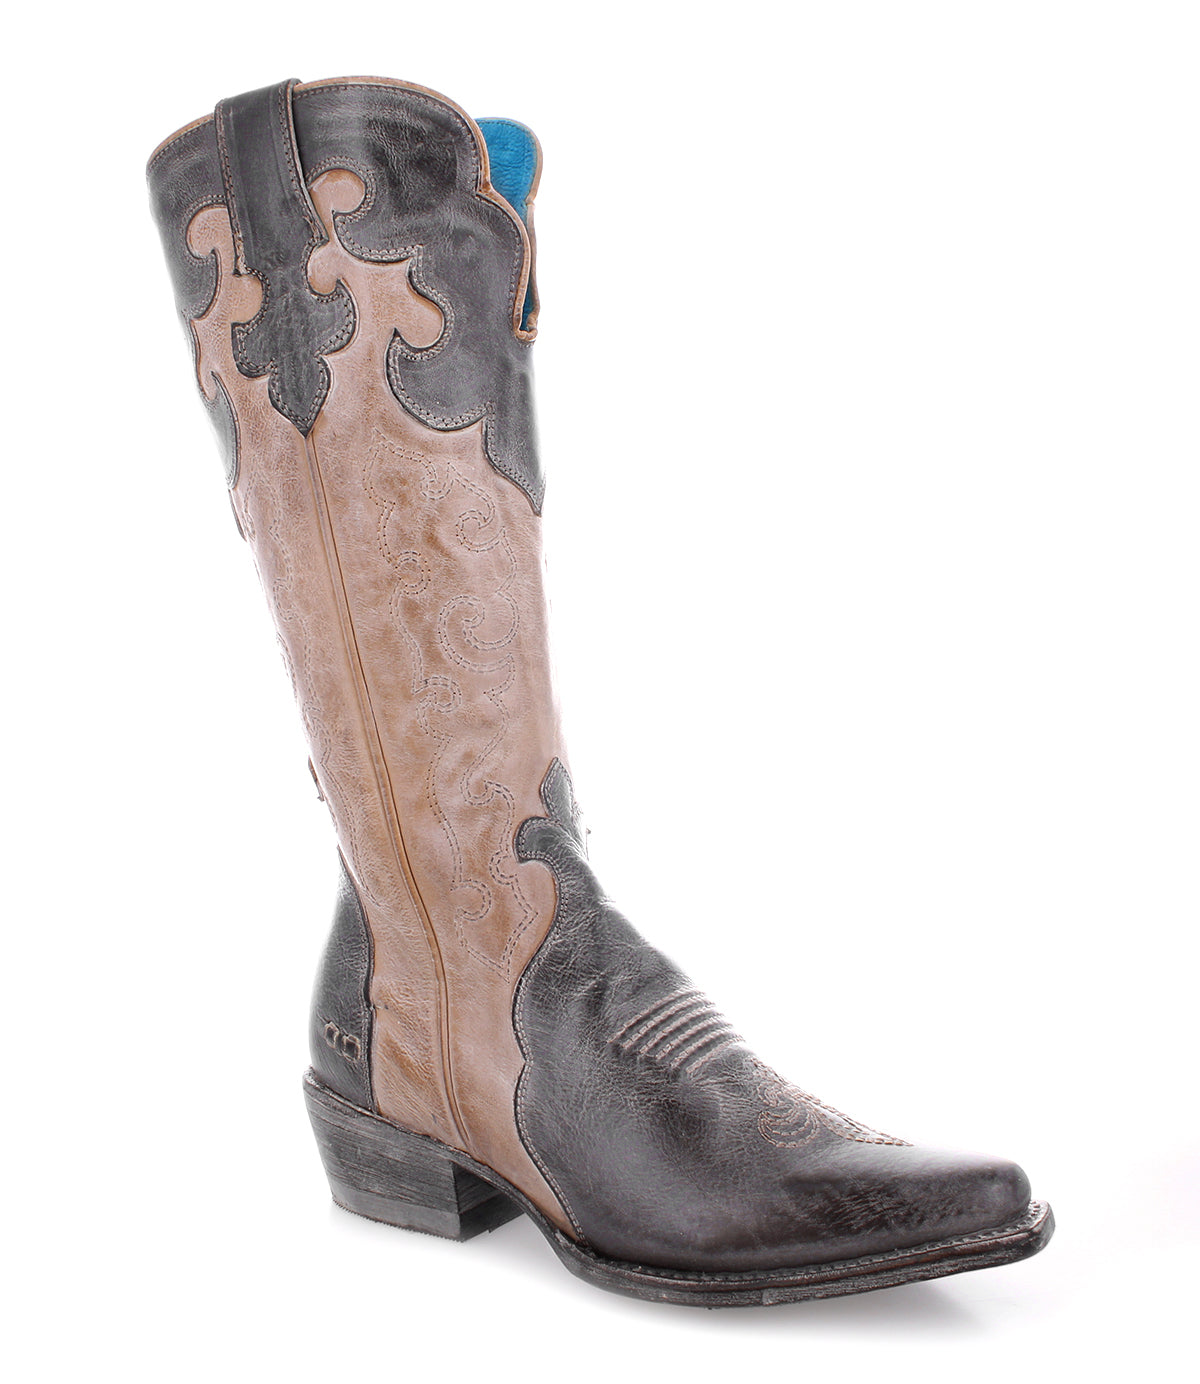 A Queen western-style women's tall boot in brown and tan on a white background by Bed Stu.